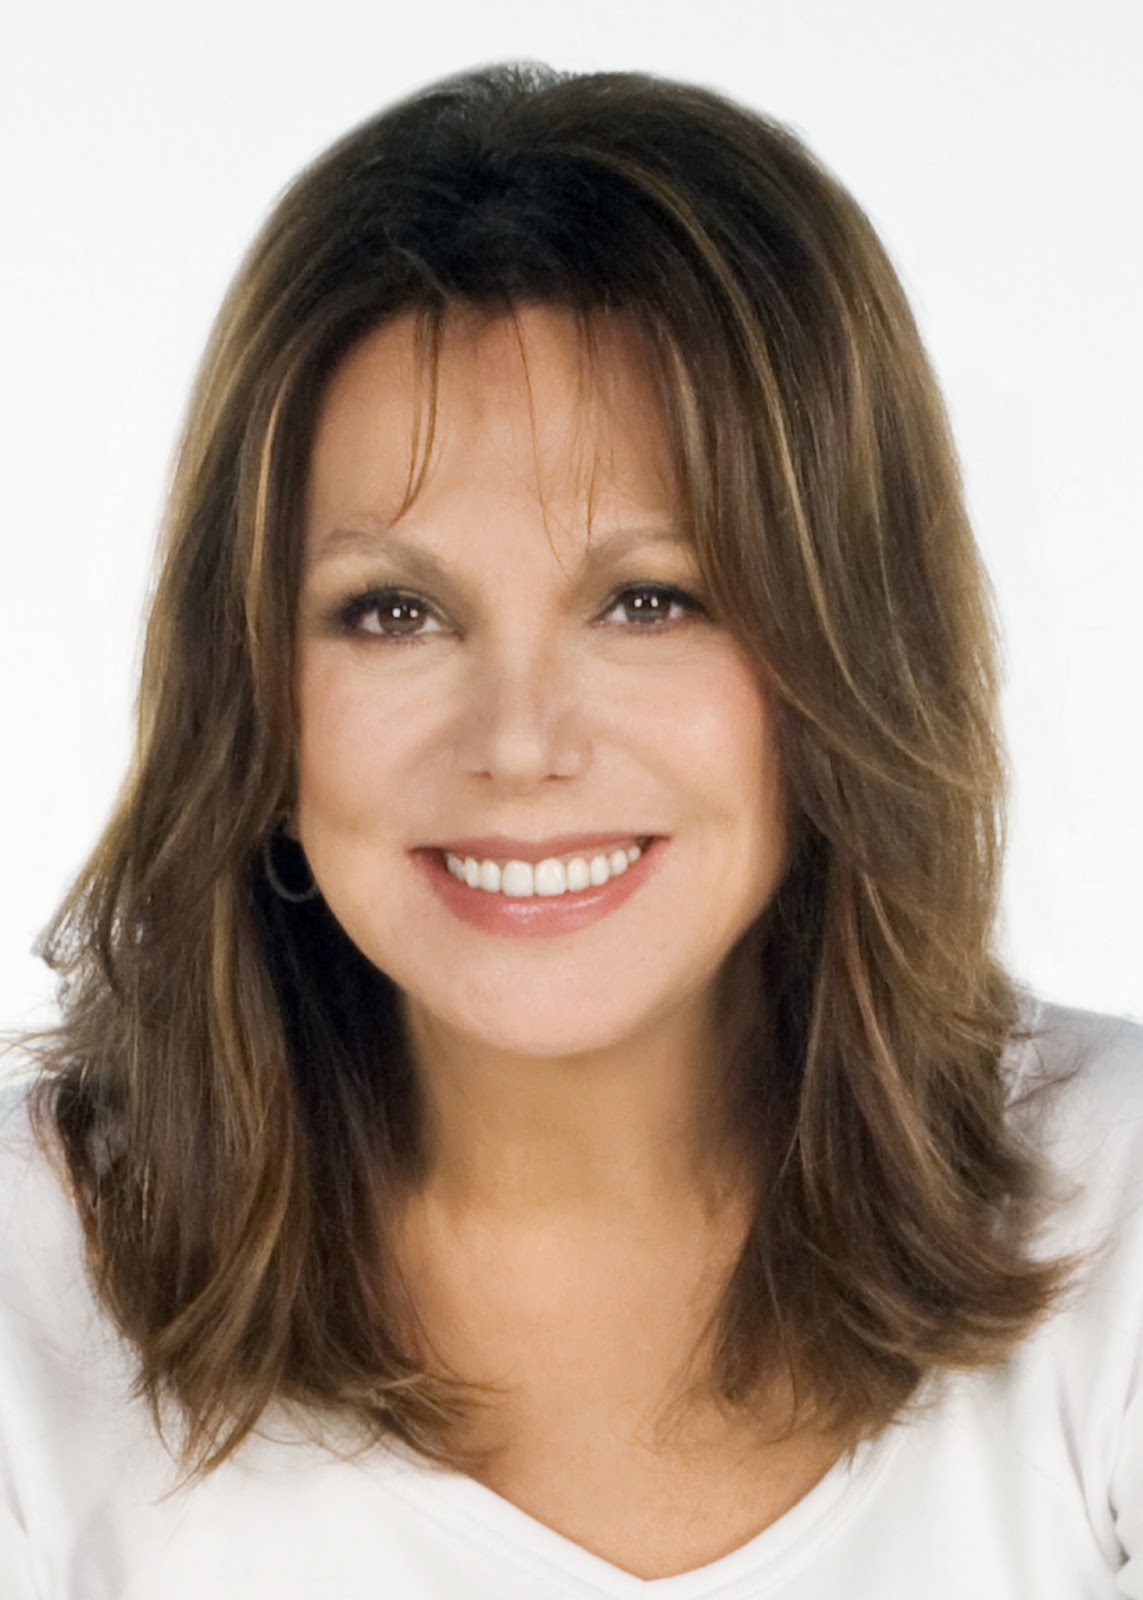 Marlo Thomas Plastic Surgery Before and After Facelift